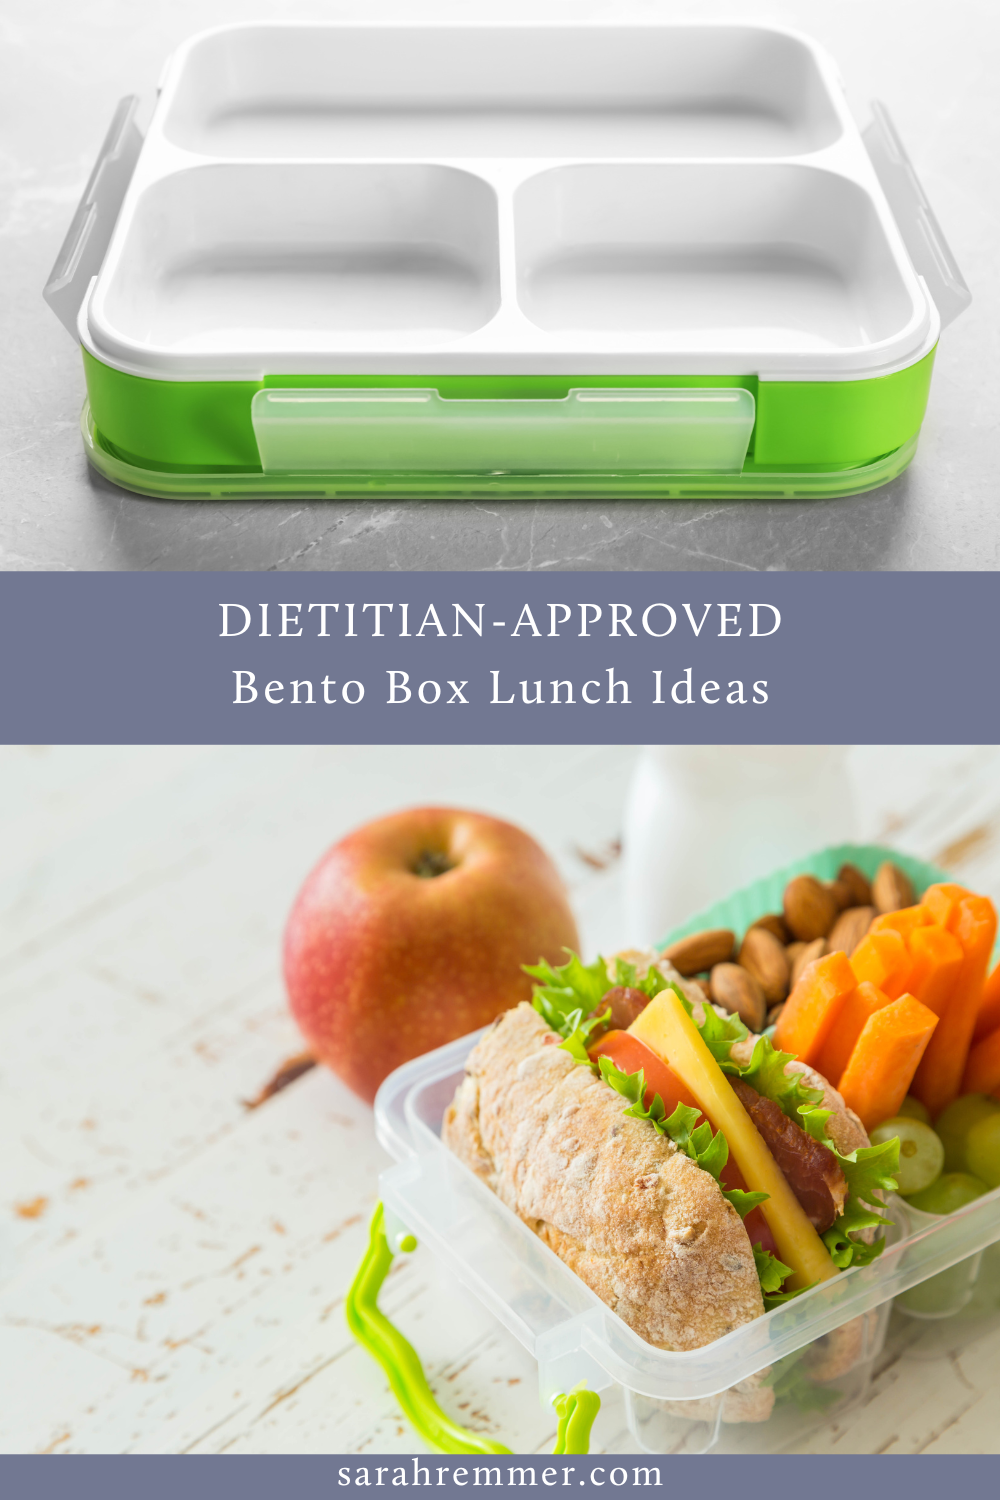 Over 80 bento box lunch ideas from a dietitian mom, to make your lunch-packing journey a lot easier!